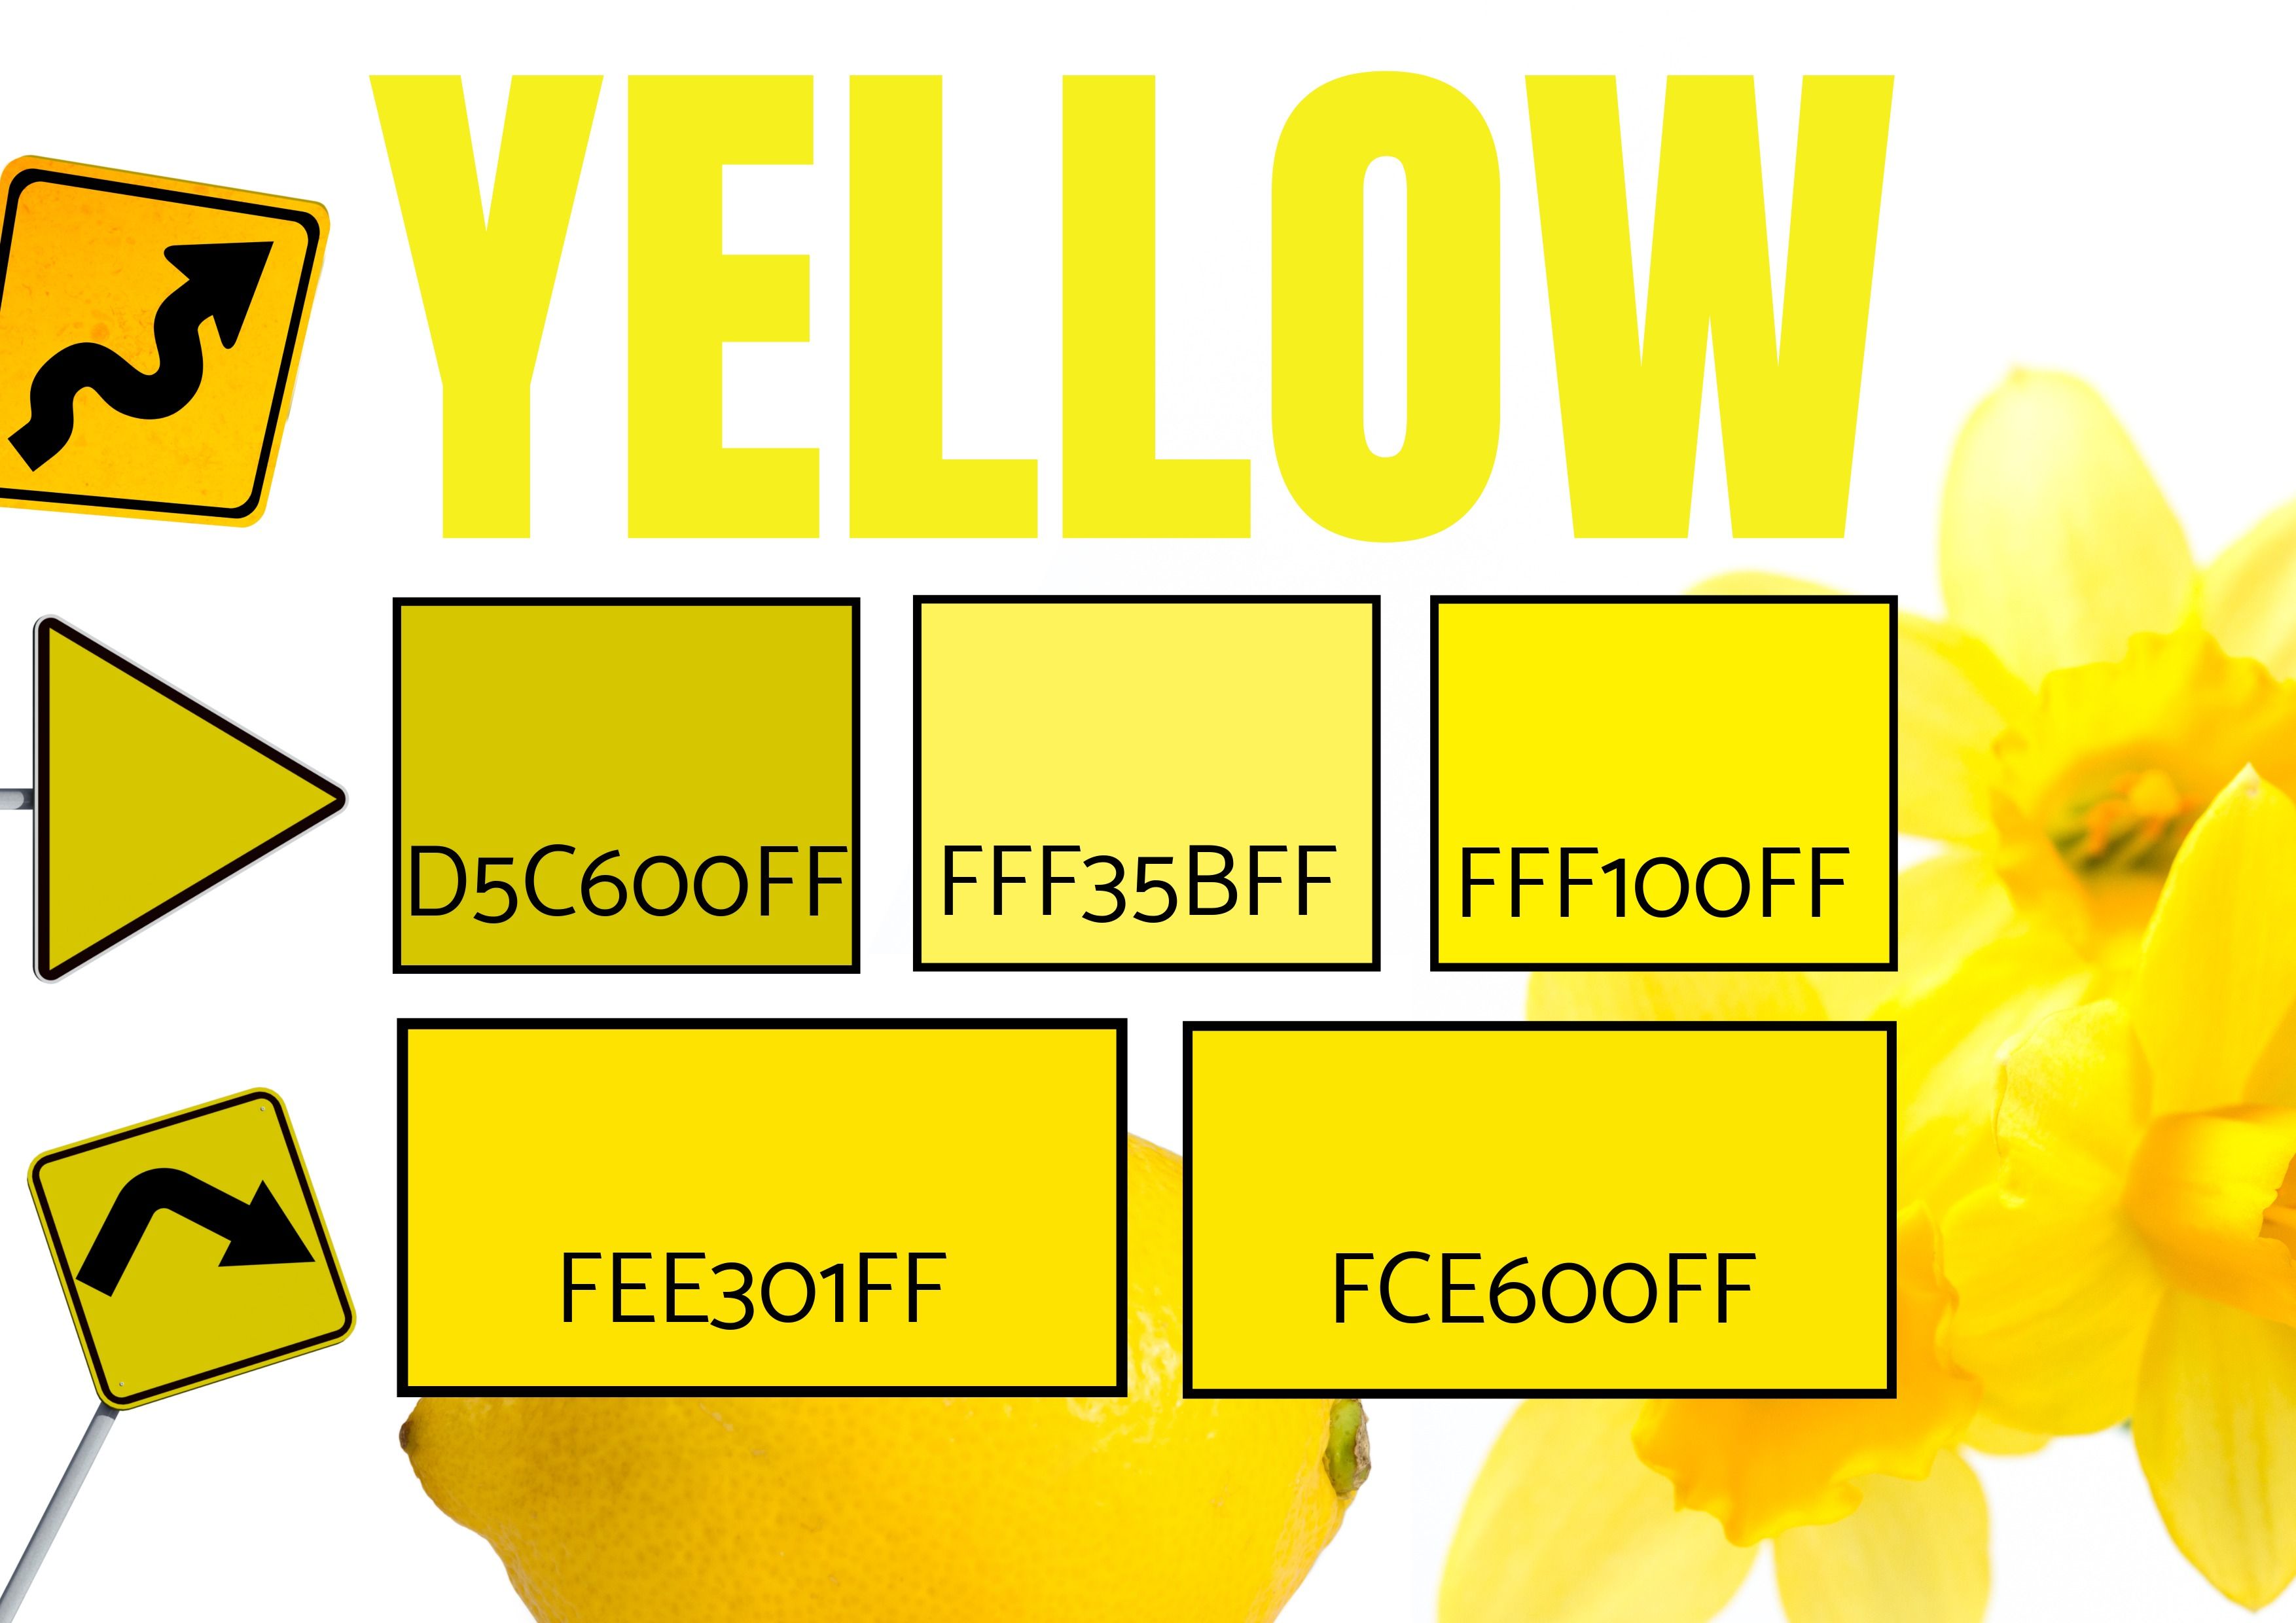 Selection of 5 Yellow Shades with images of daffodils, road warning signs and a lemon - symbolism - Color theory for designers: The art of using color symbolism - Image